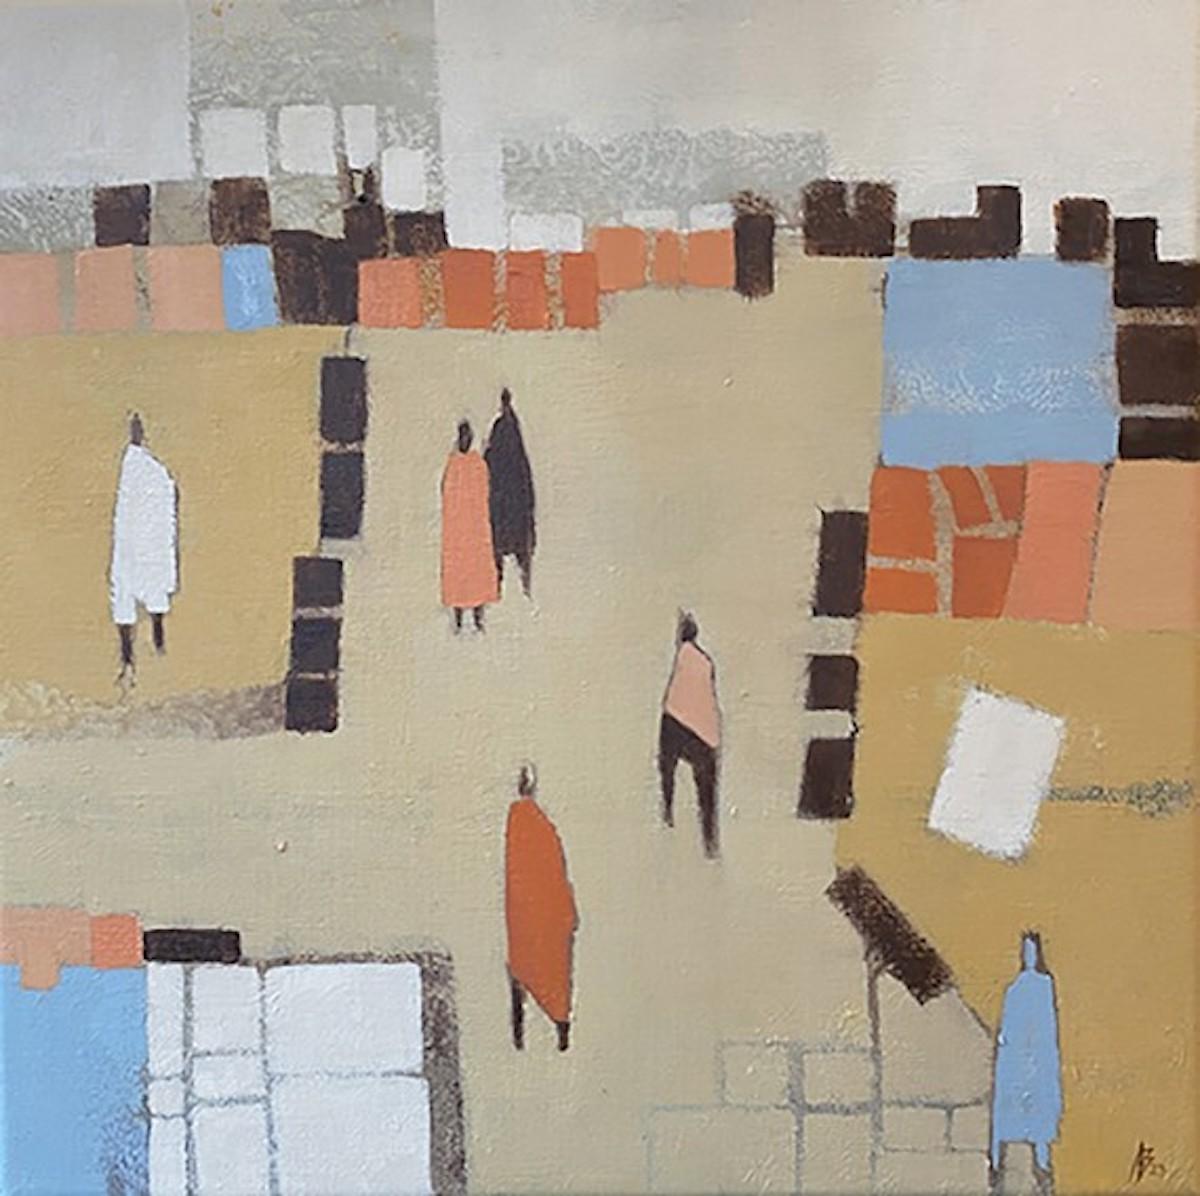 Ana Bianchi Figurative Painting - Walking Home III, Figurative Artwork, Abstract Landscape Painting